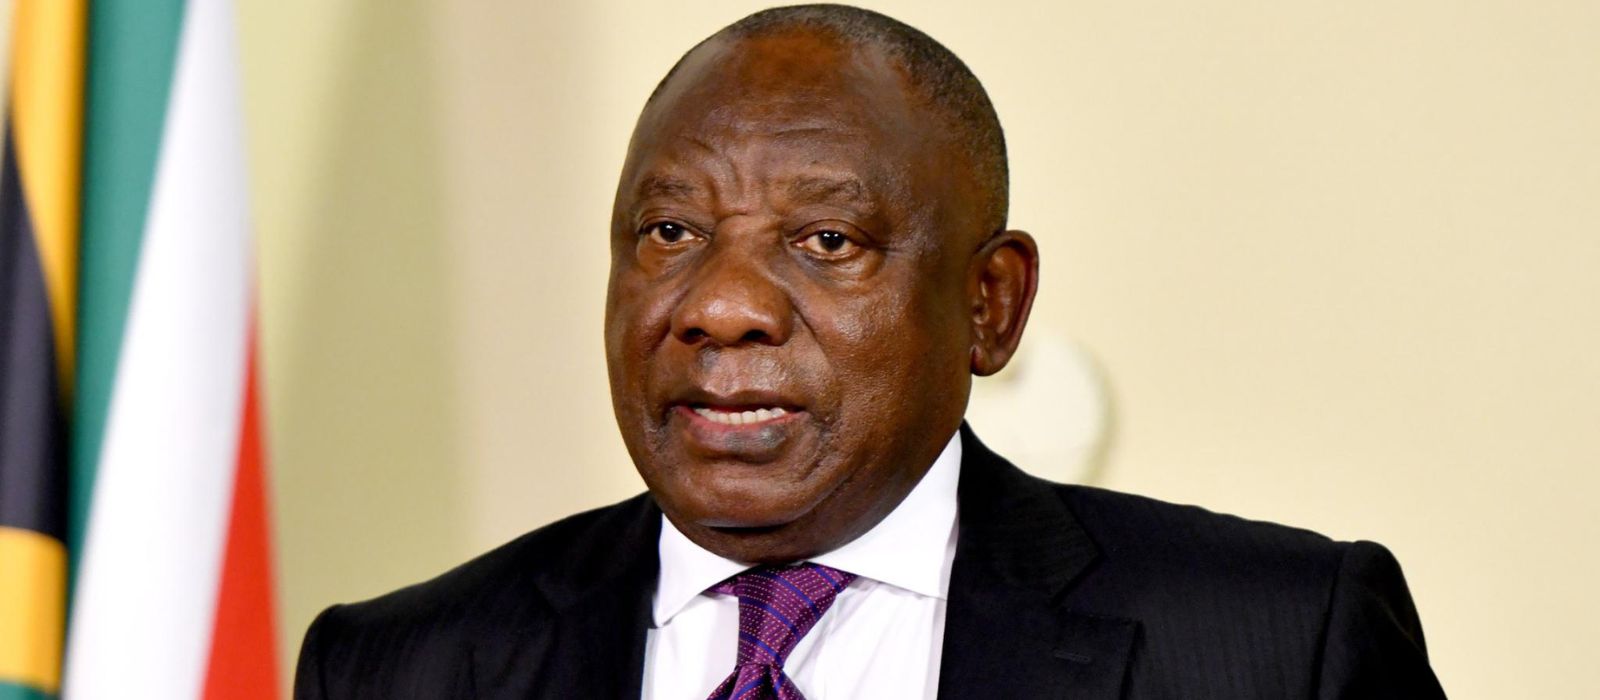 South Africa positioned as premier investment destination, says President Ramaphosa